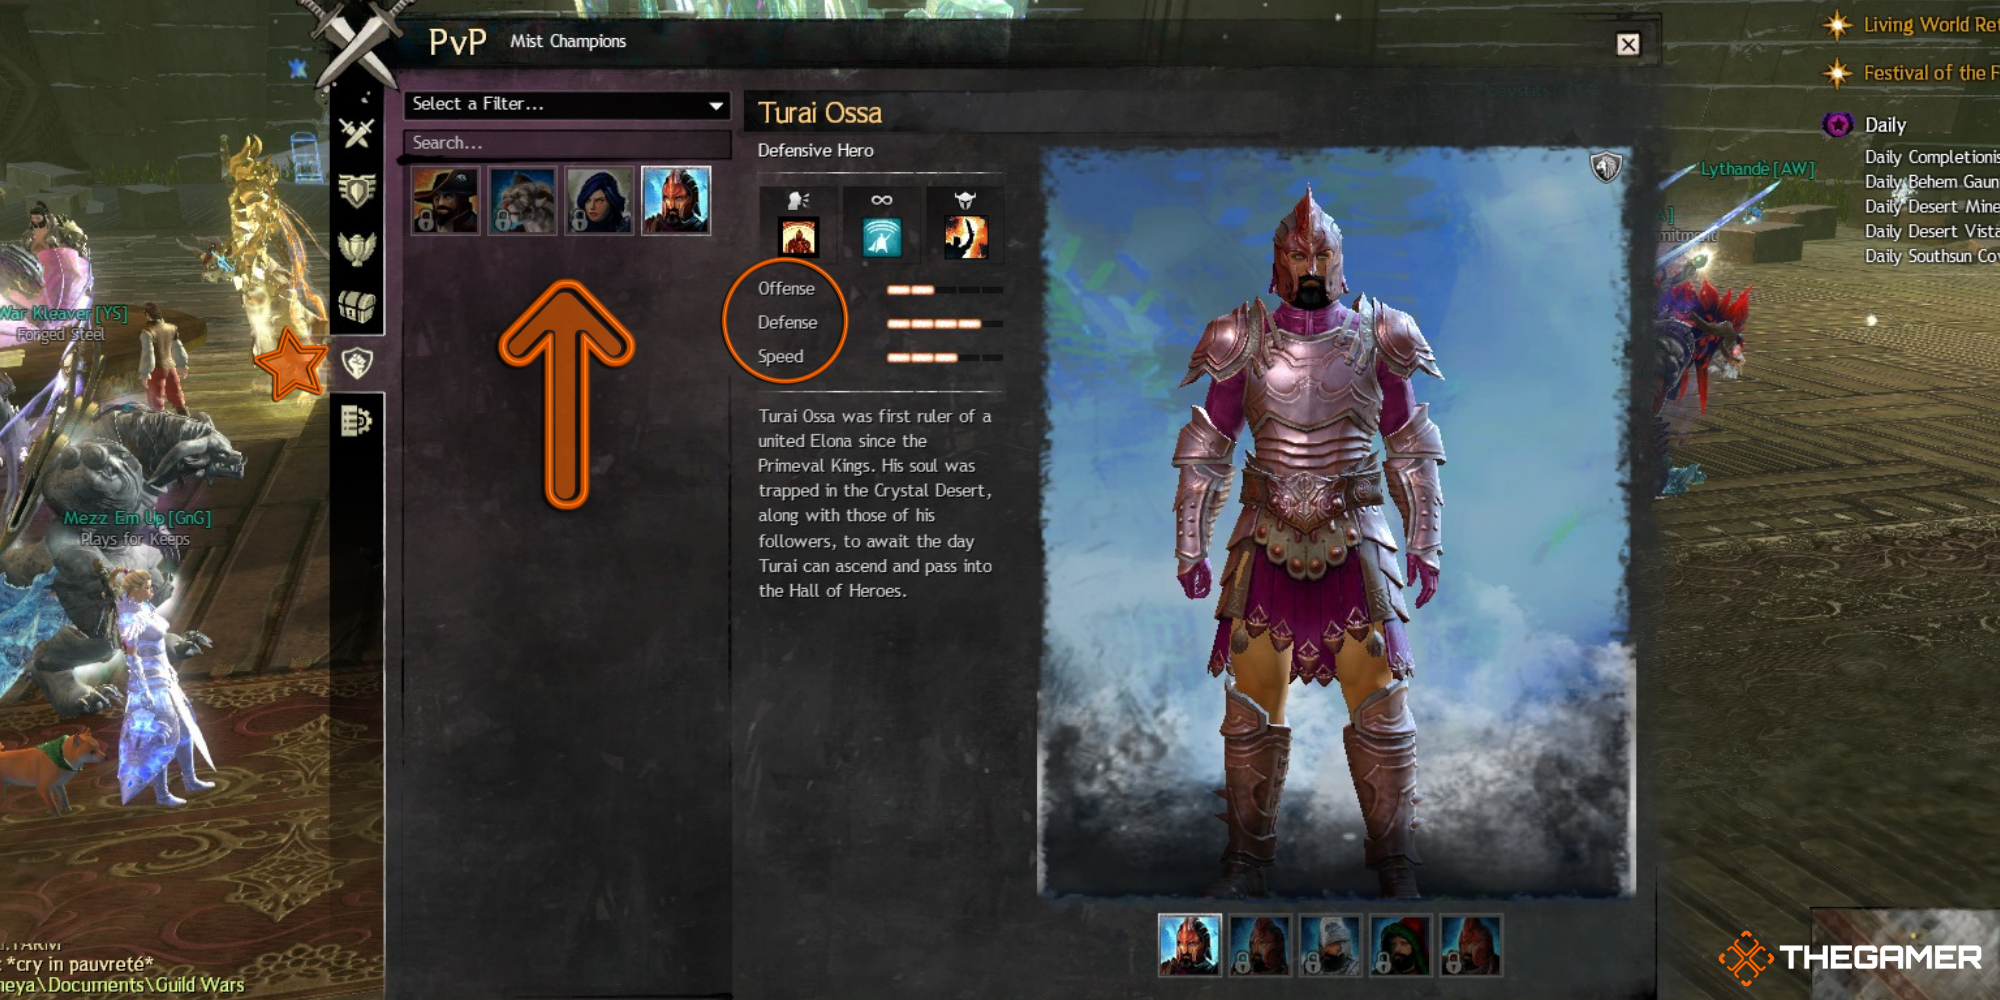 GW2 - Screenshot showing the player the details of the Mist Champions tab on the PvP menu